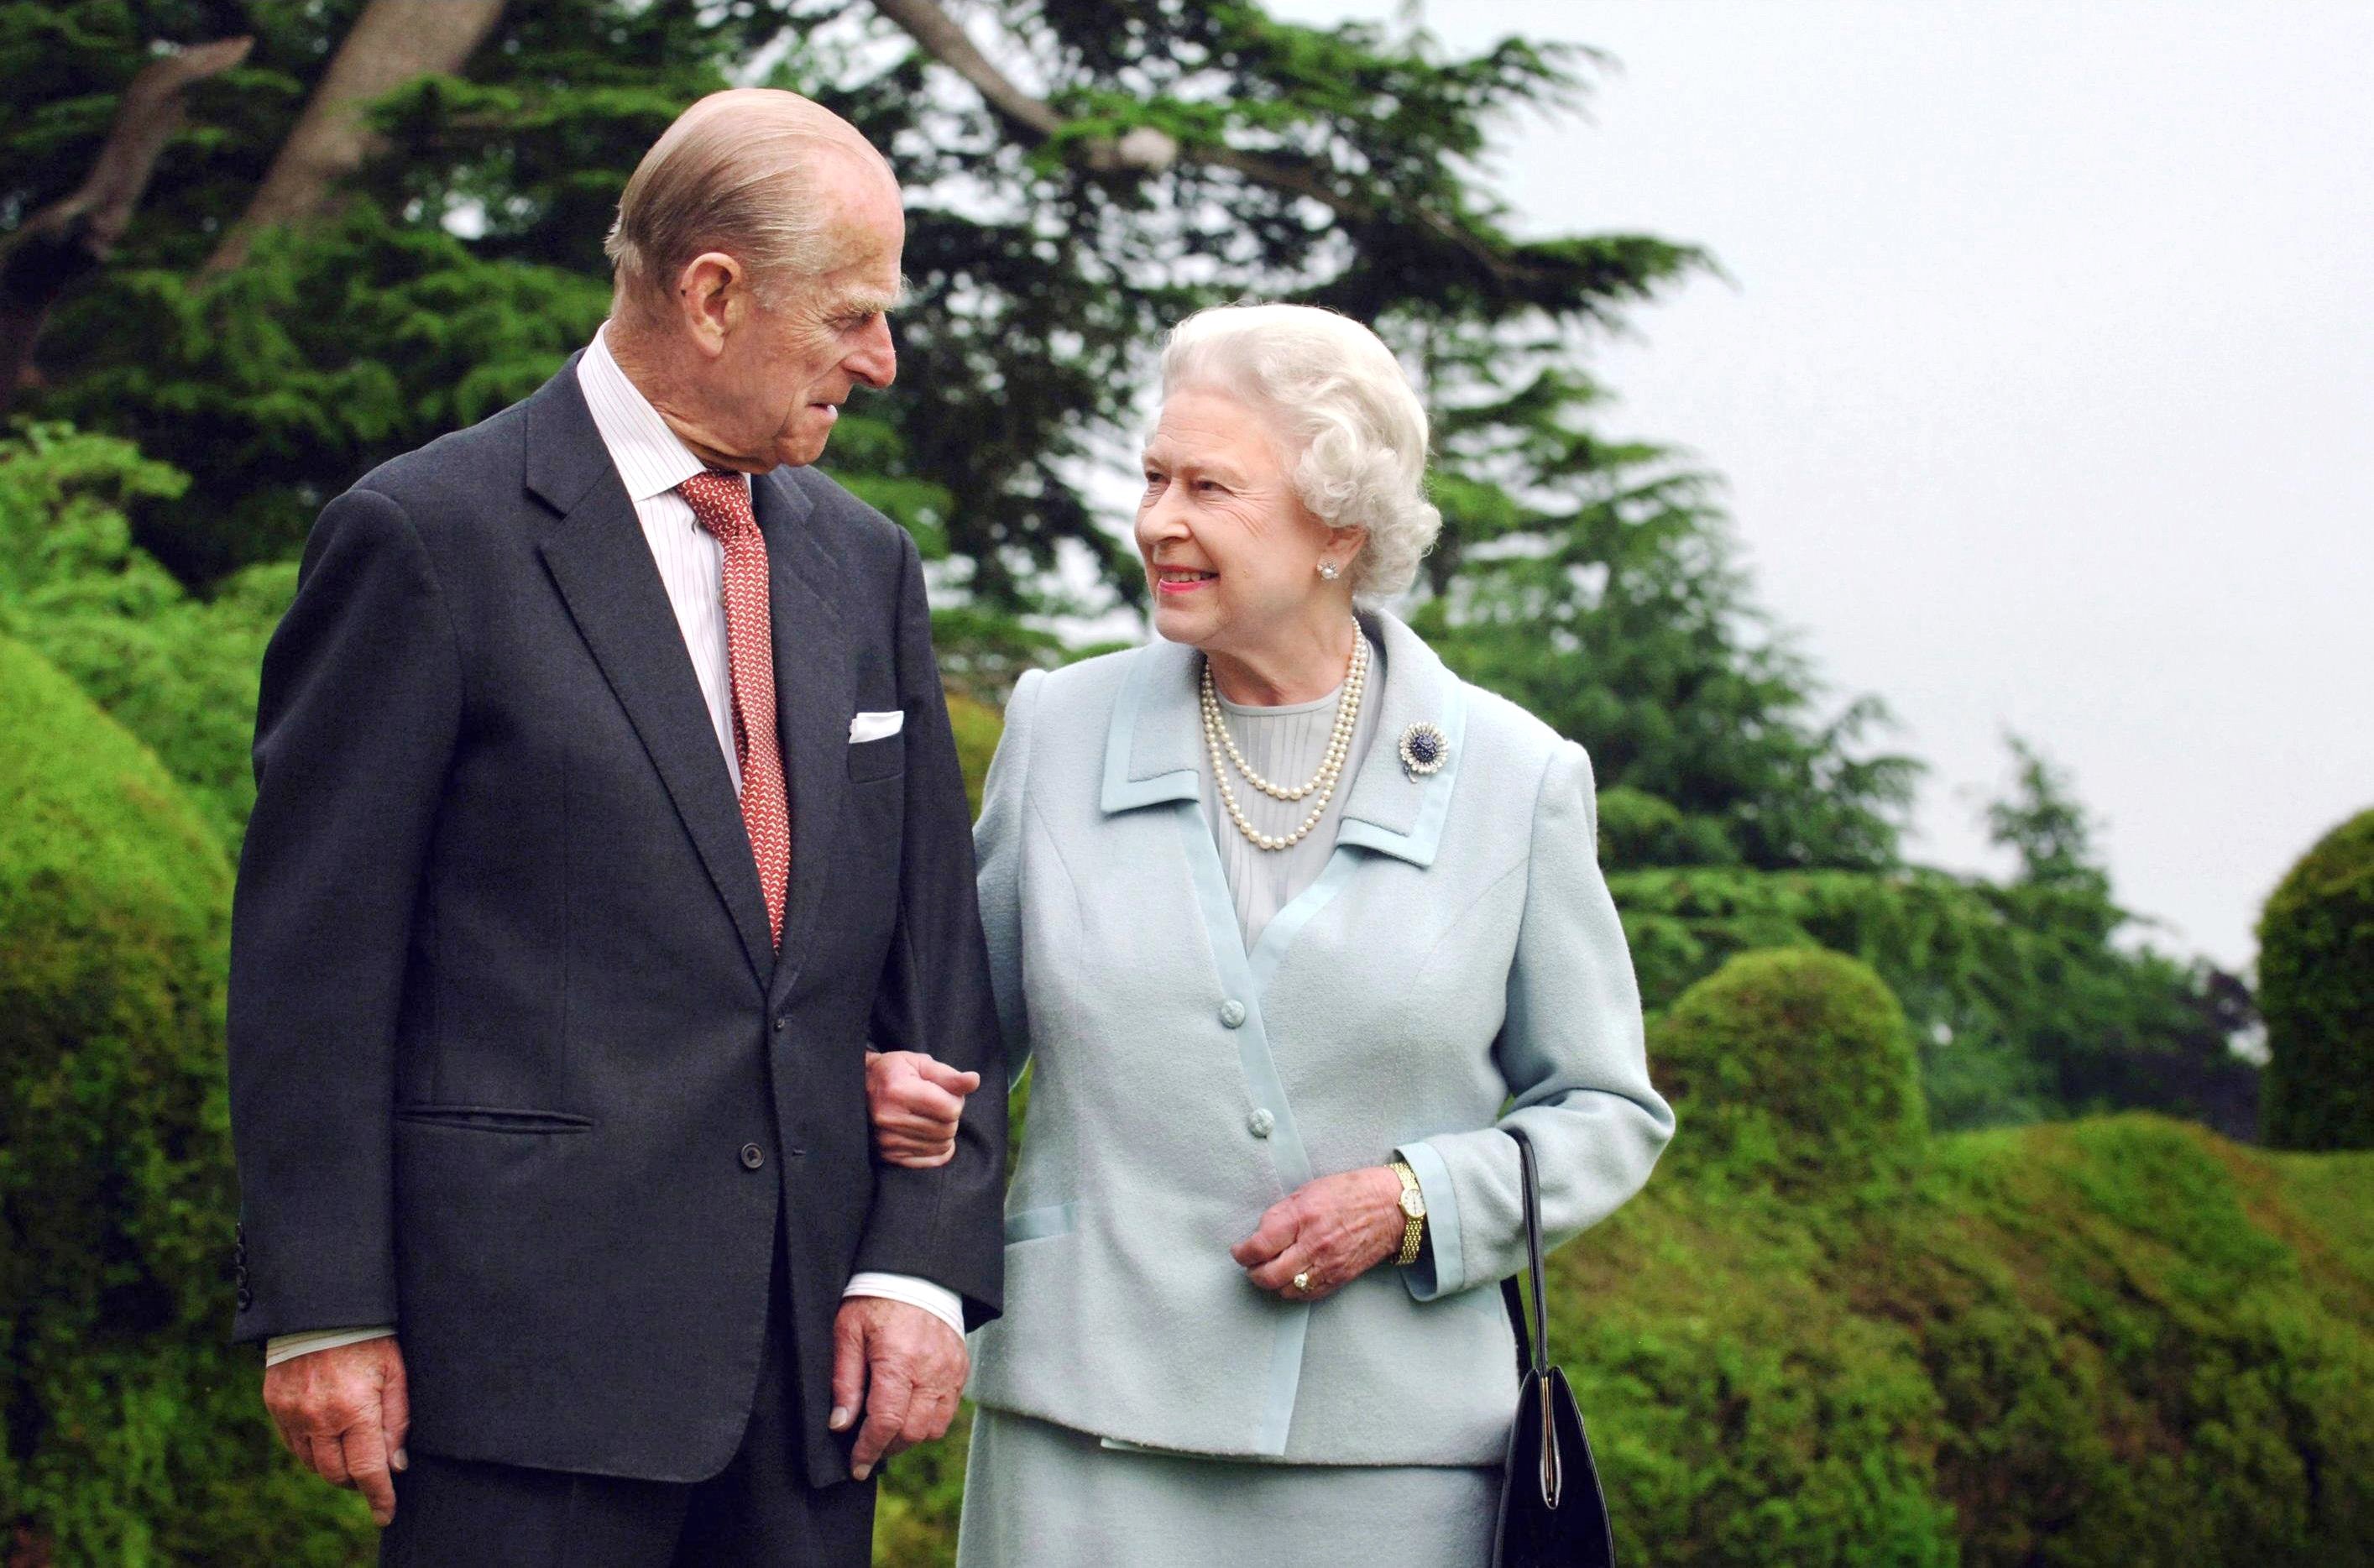 Queen Elizabeth II and her husband, Prince Philip, walking arm-in-arm at Broadlands, Hampshire